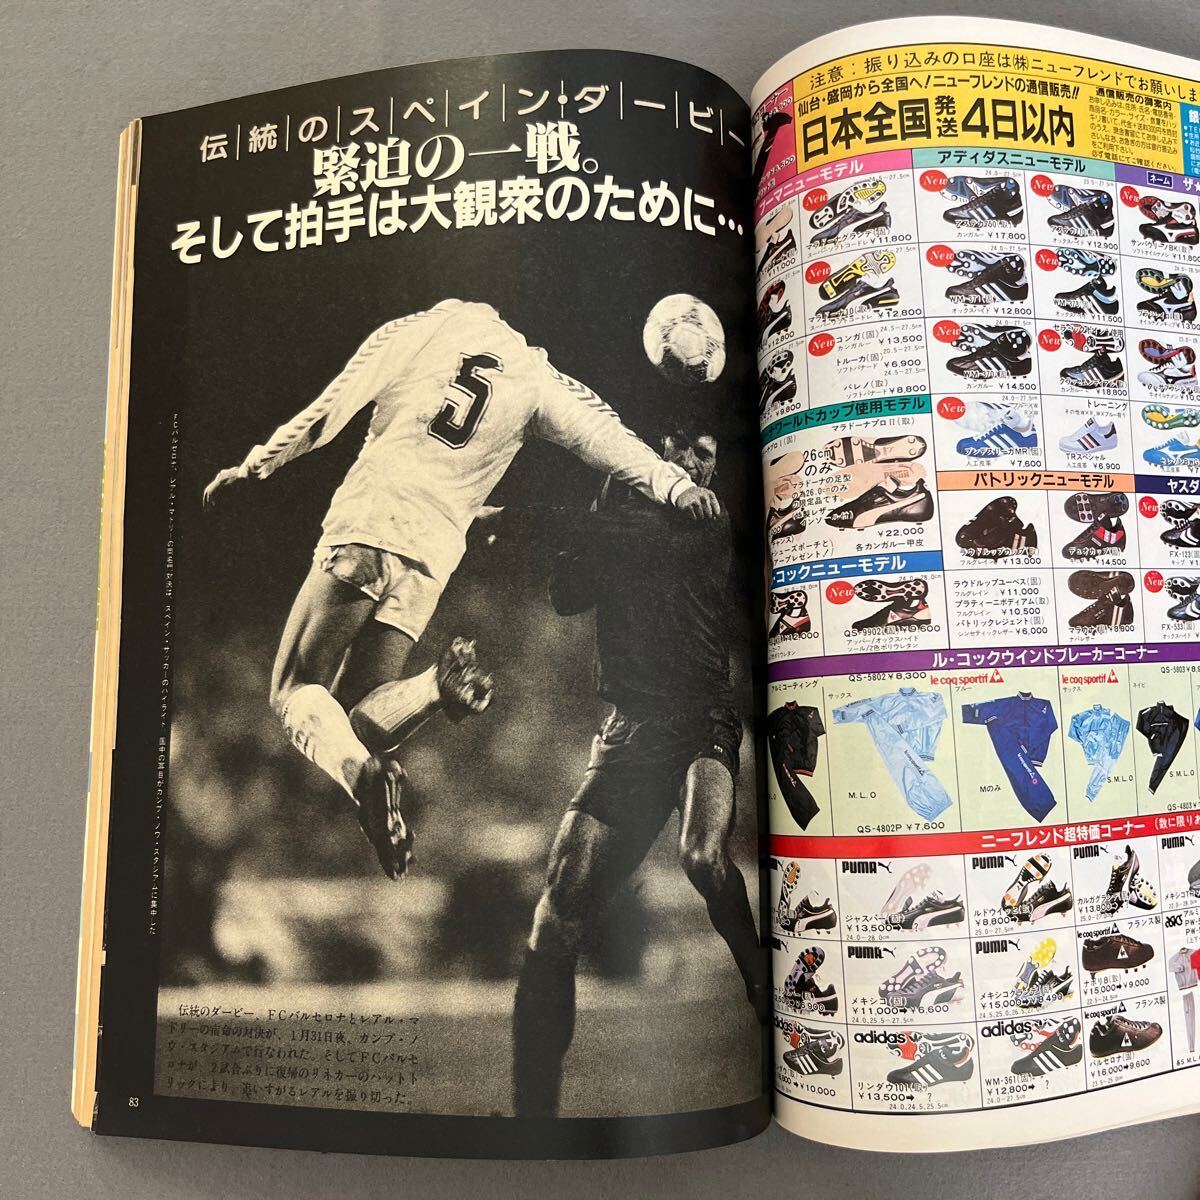  soccer large je -stroke 4 month number * Showa era 62 year 4 month 1 day issue *ma Rado na* Xerox * super soccer \'87* Spain Lee g*JSL